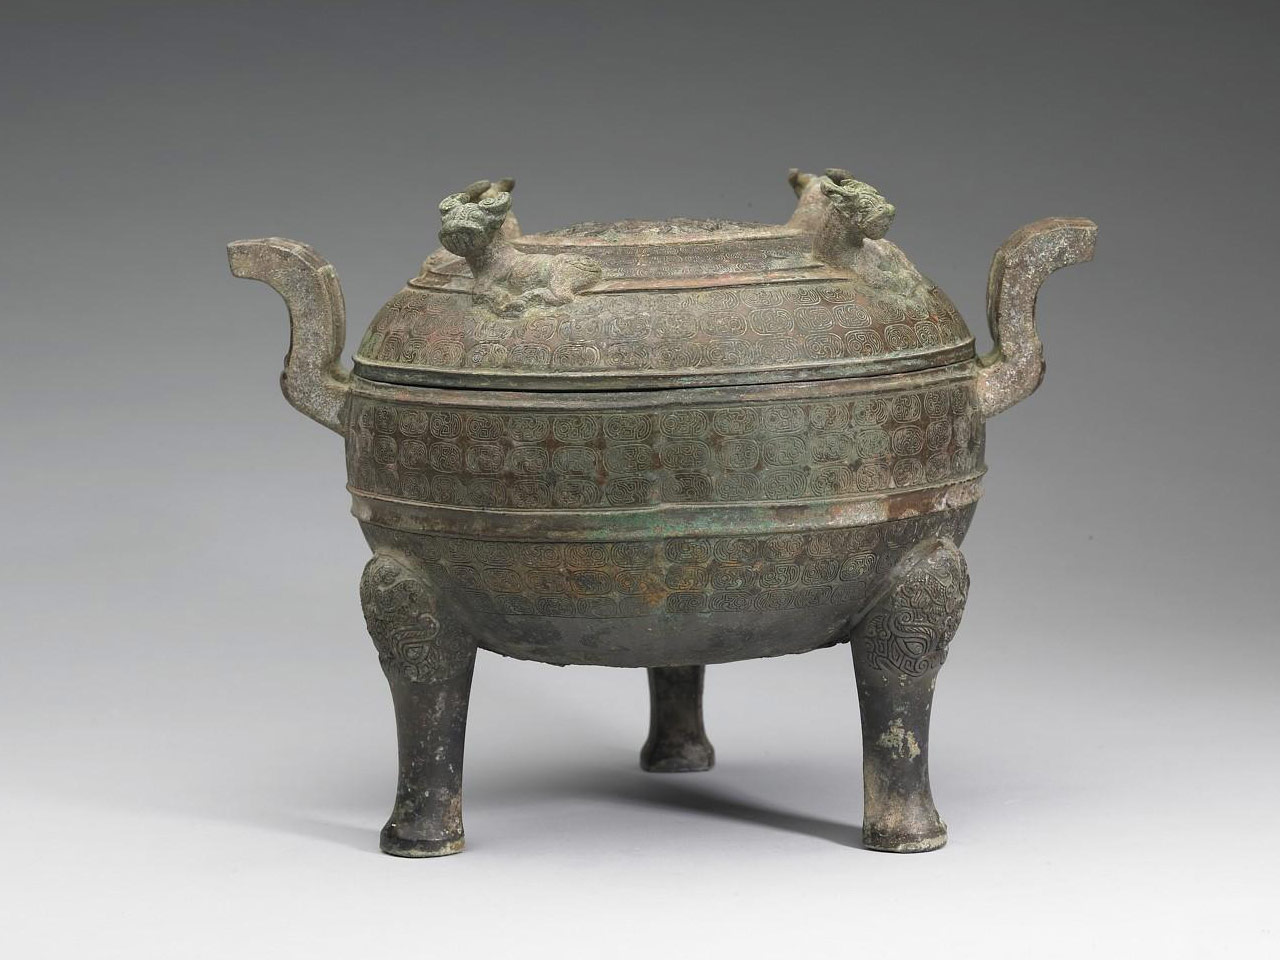 Ding cauldron with four oxen on the lid, Warring States Period